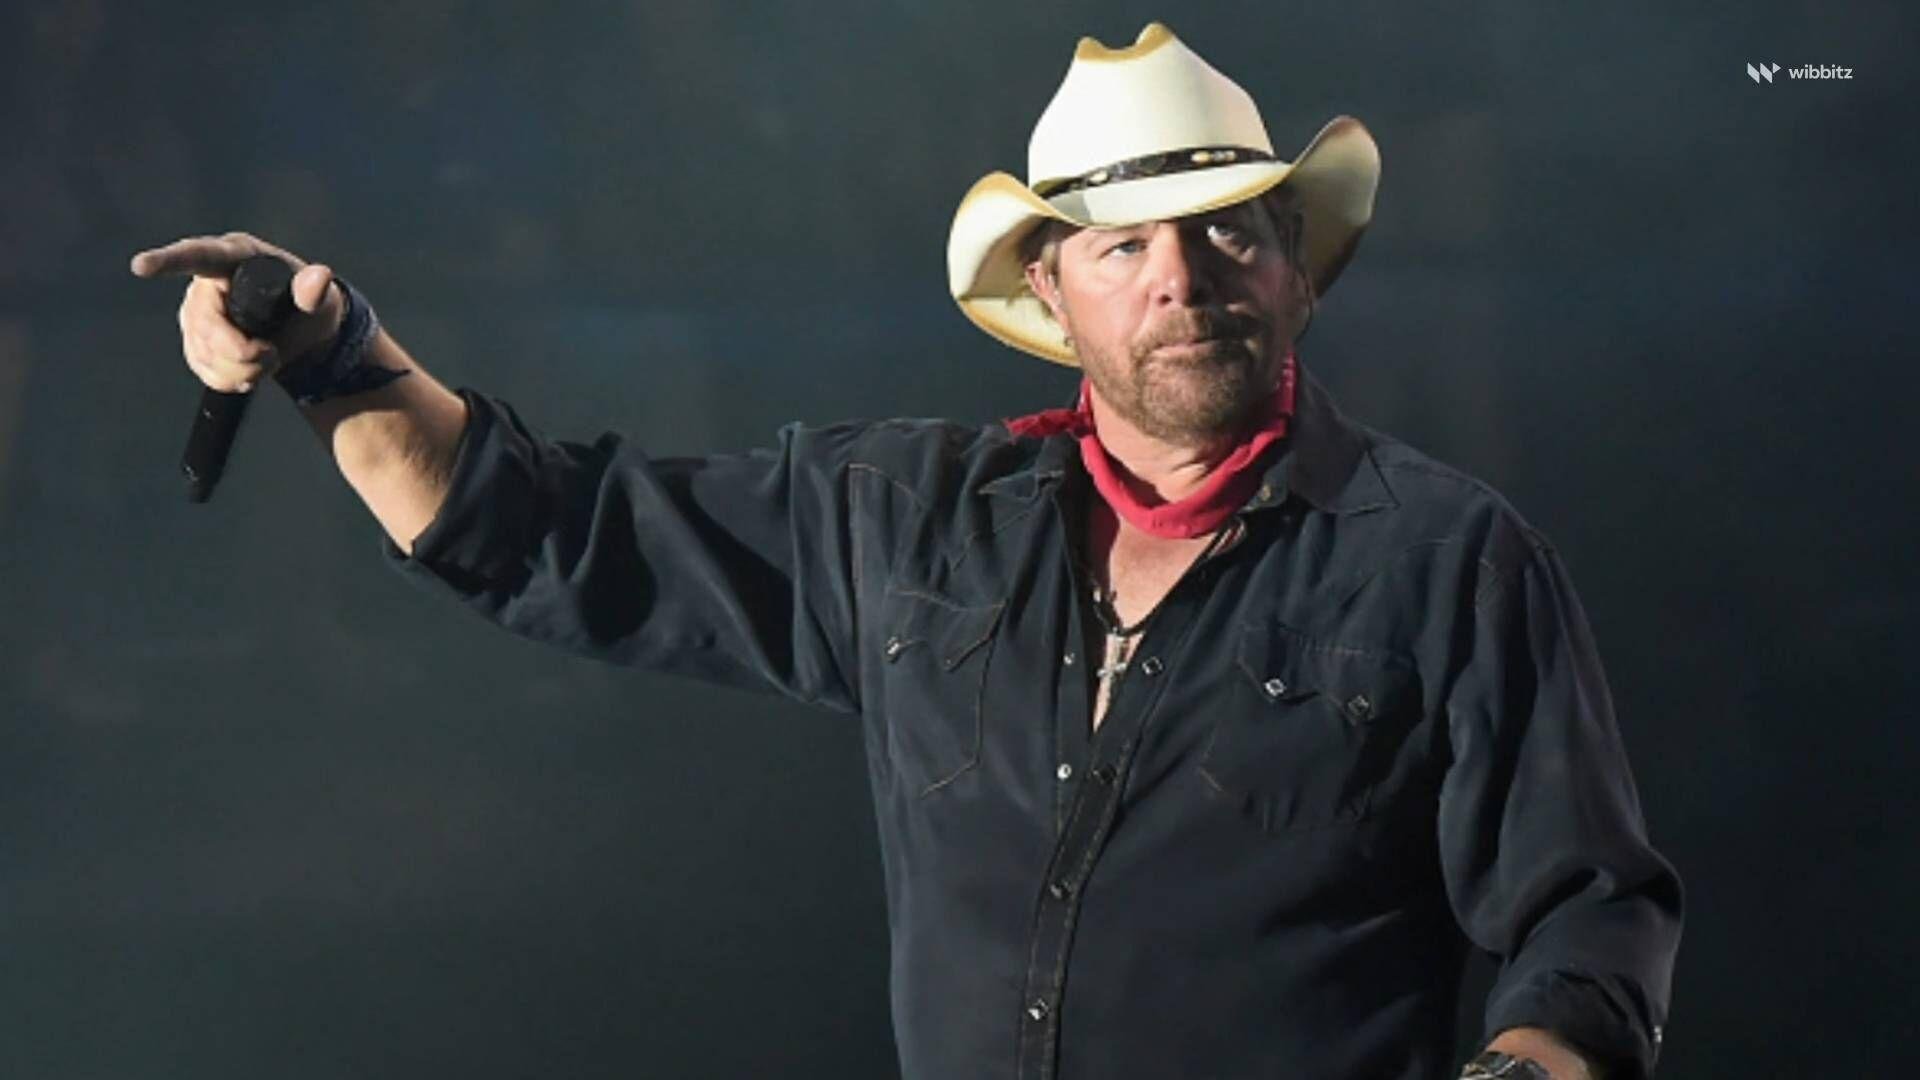 Country singer Toby Keith 'feeling good' after cancer diagnosis